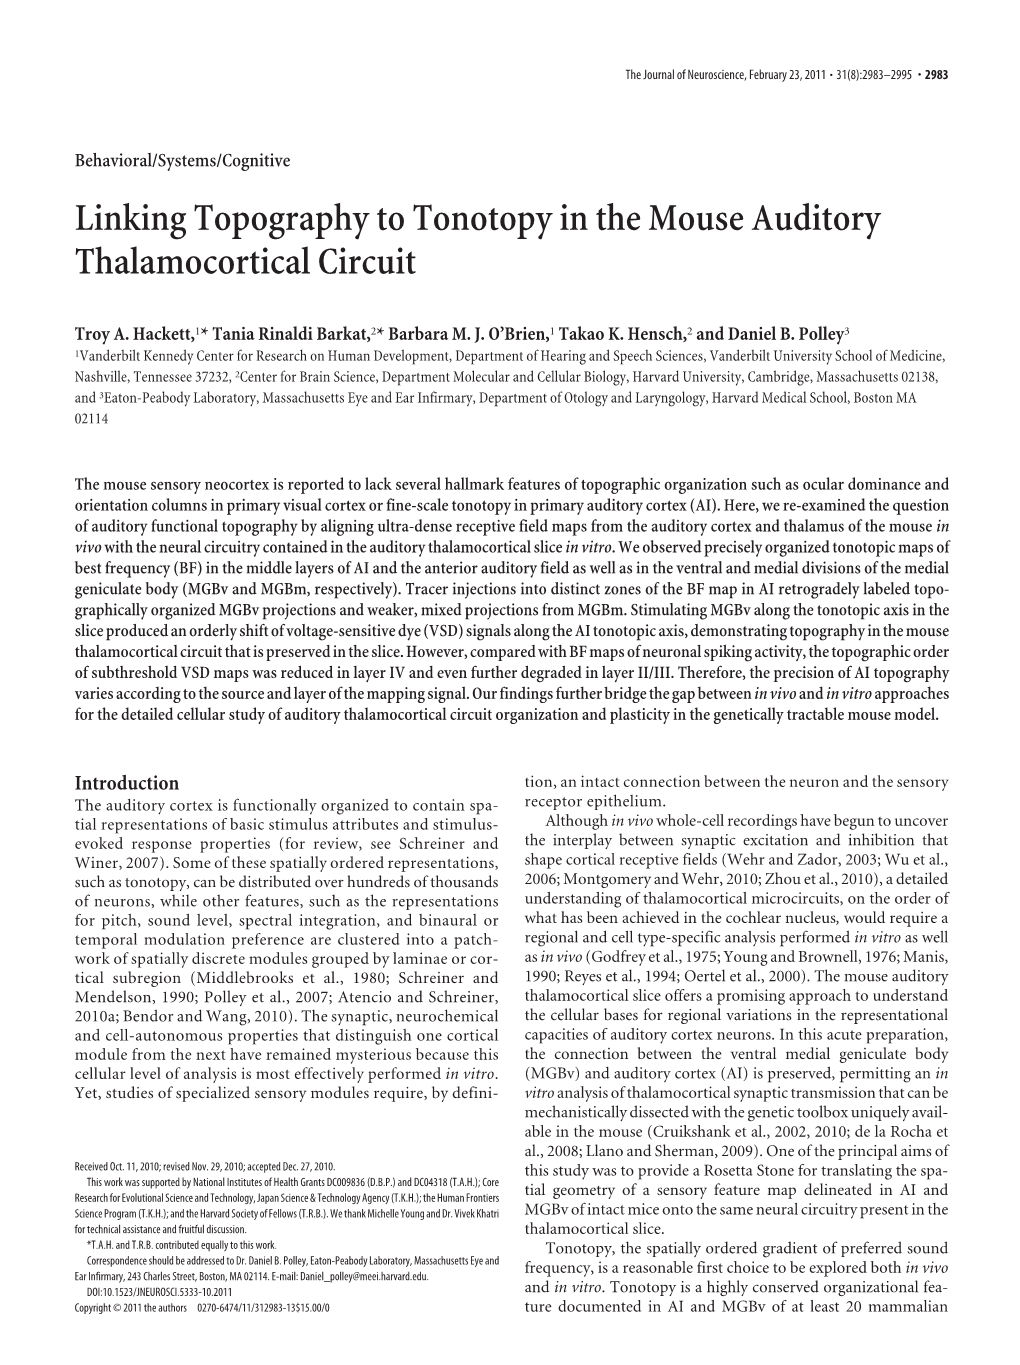 Linking Topography to Tonotopy in the Mouse Auditory Thalamocortical Circuit